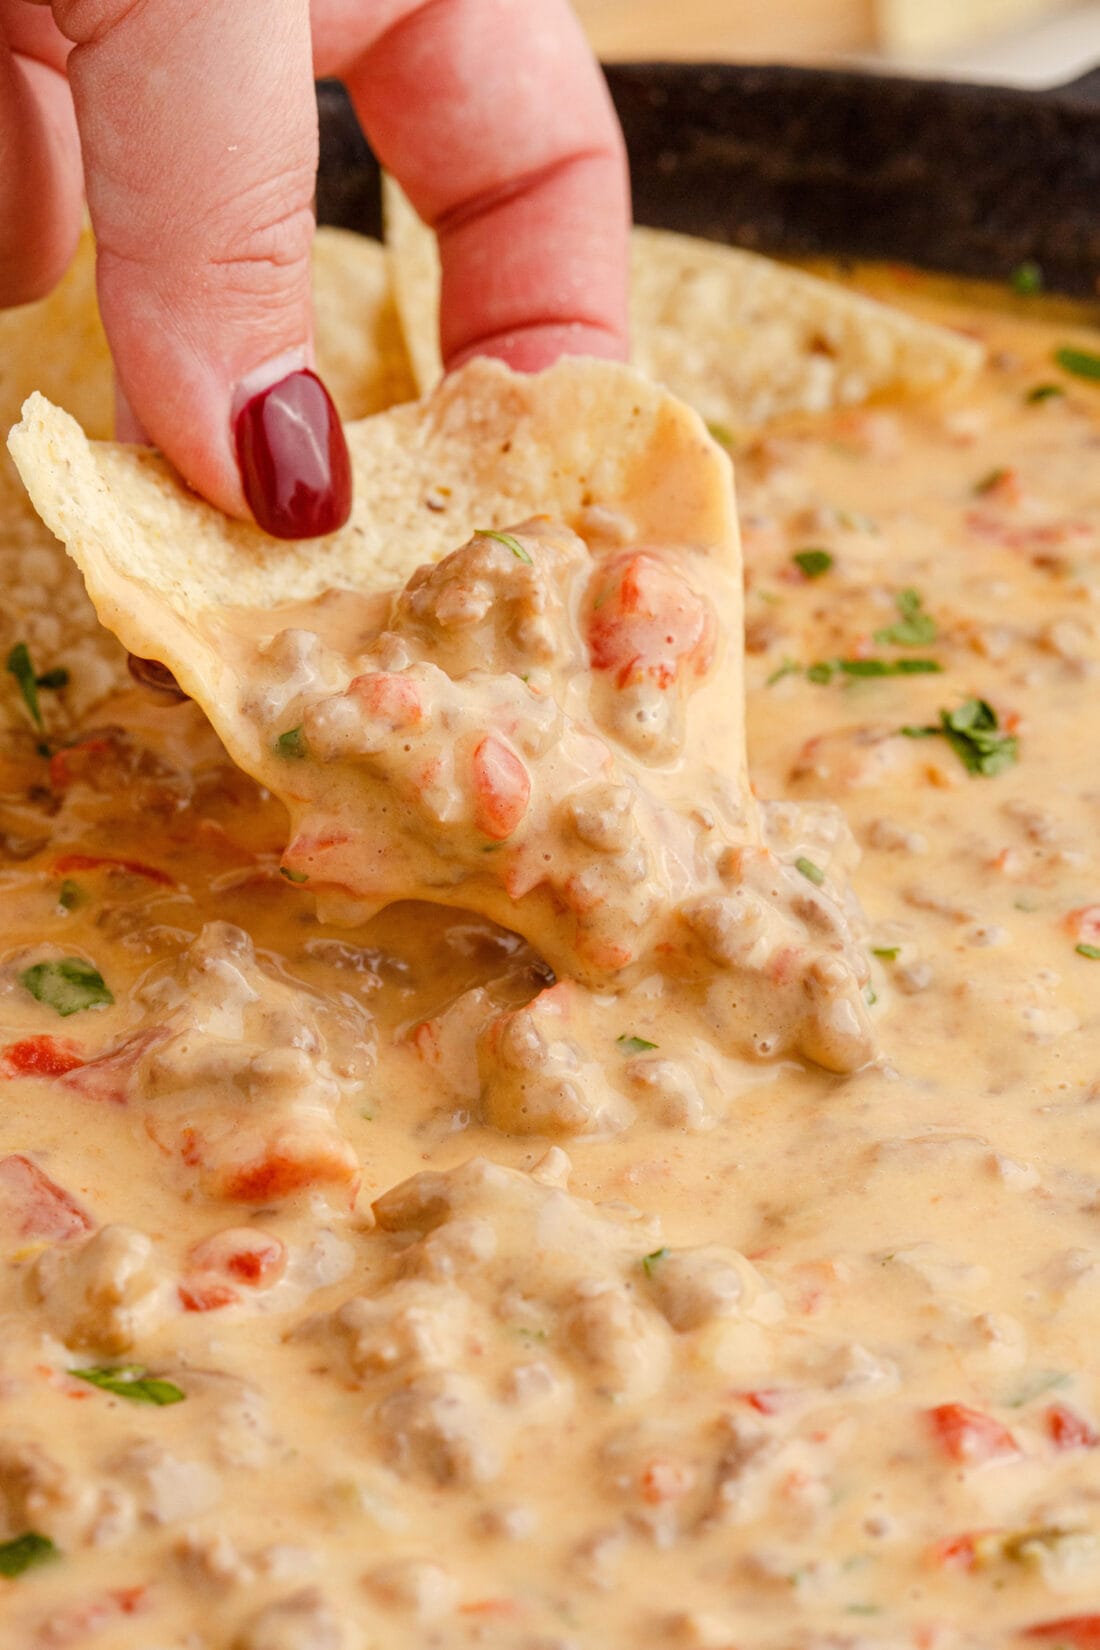 dipping chip into Rotel Dip